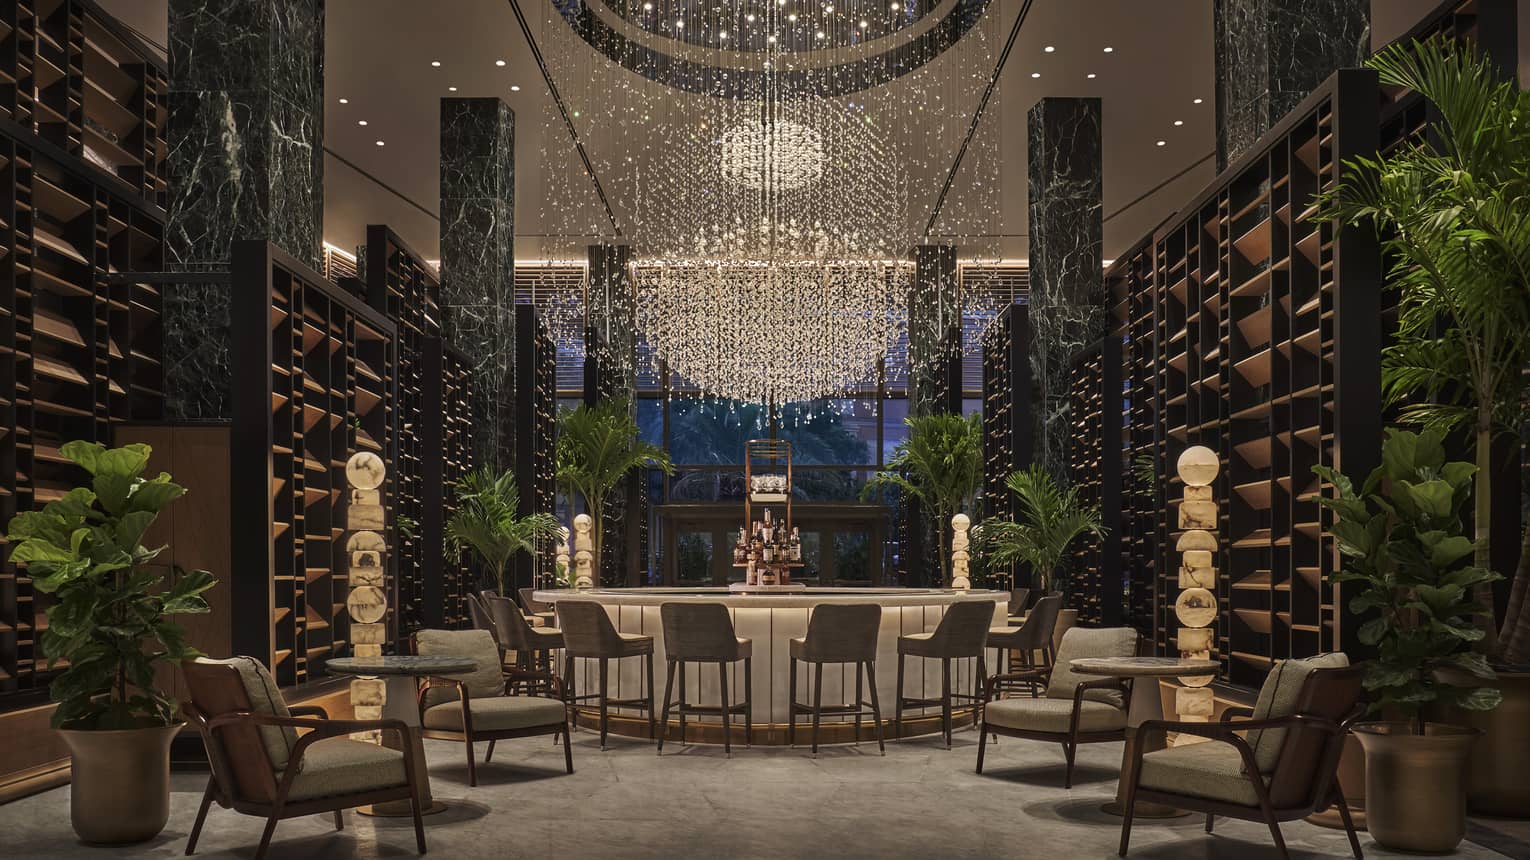 Chandelier Bar with six jade pillars flanked by wooden shelves and potted palms, glass-topped bar in the middle with six cocktail chairs, giant chandelier hanging overhead